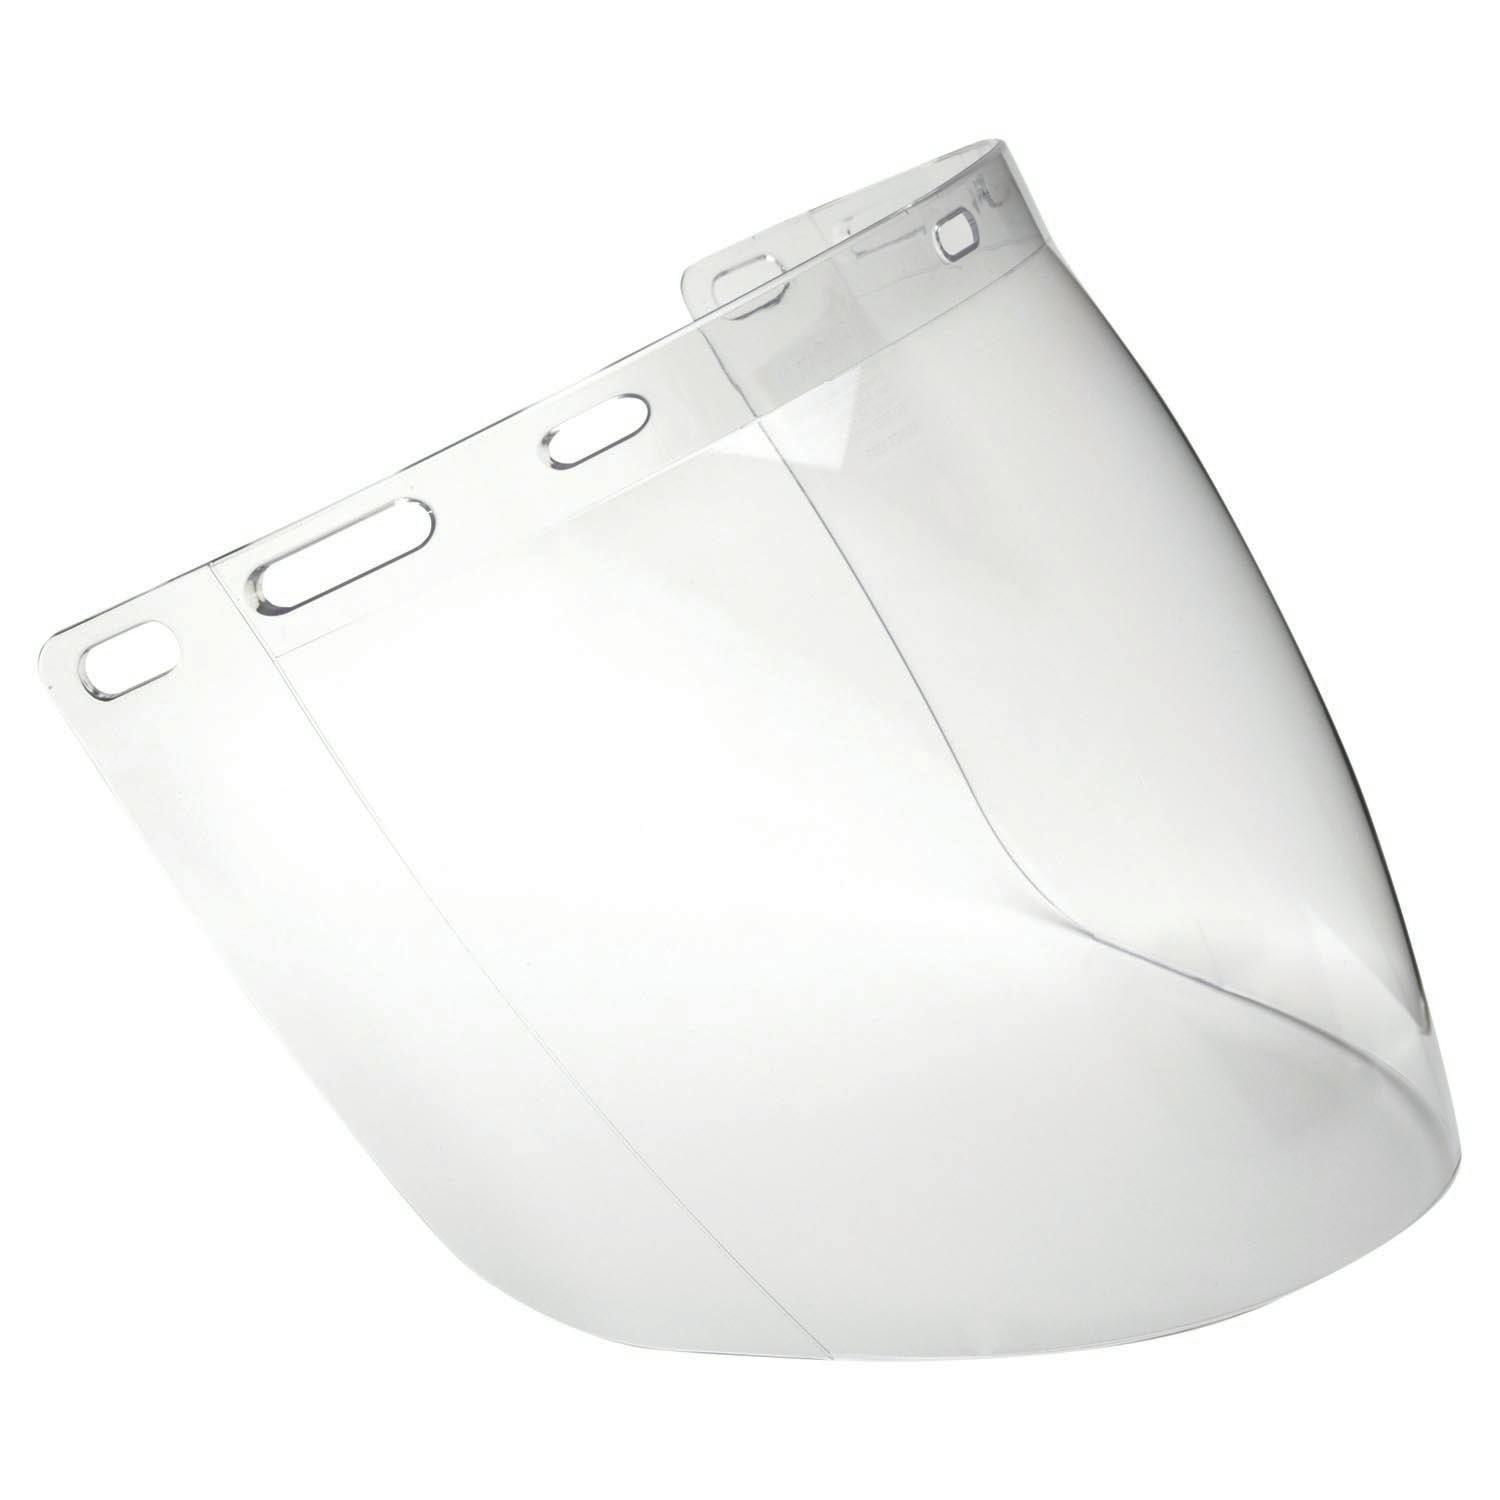 Pro Choice Economy Visor To Suit Pro Choice Safety Gear Browguards (Bg & Hhbge) Clear Lens (Non Anti-Fog)_0